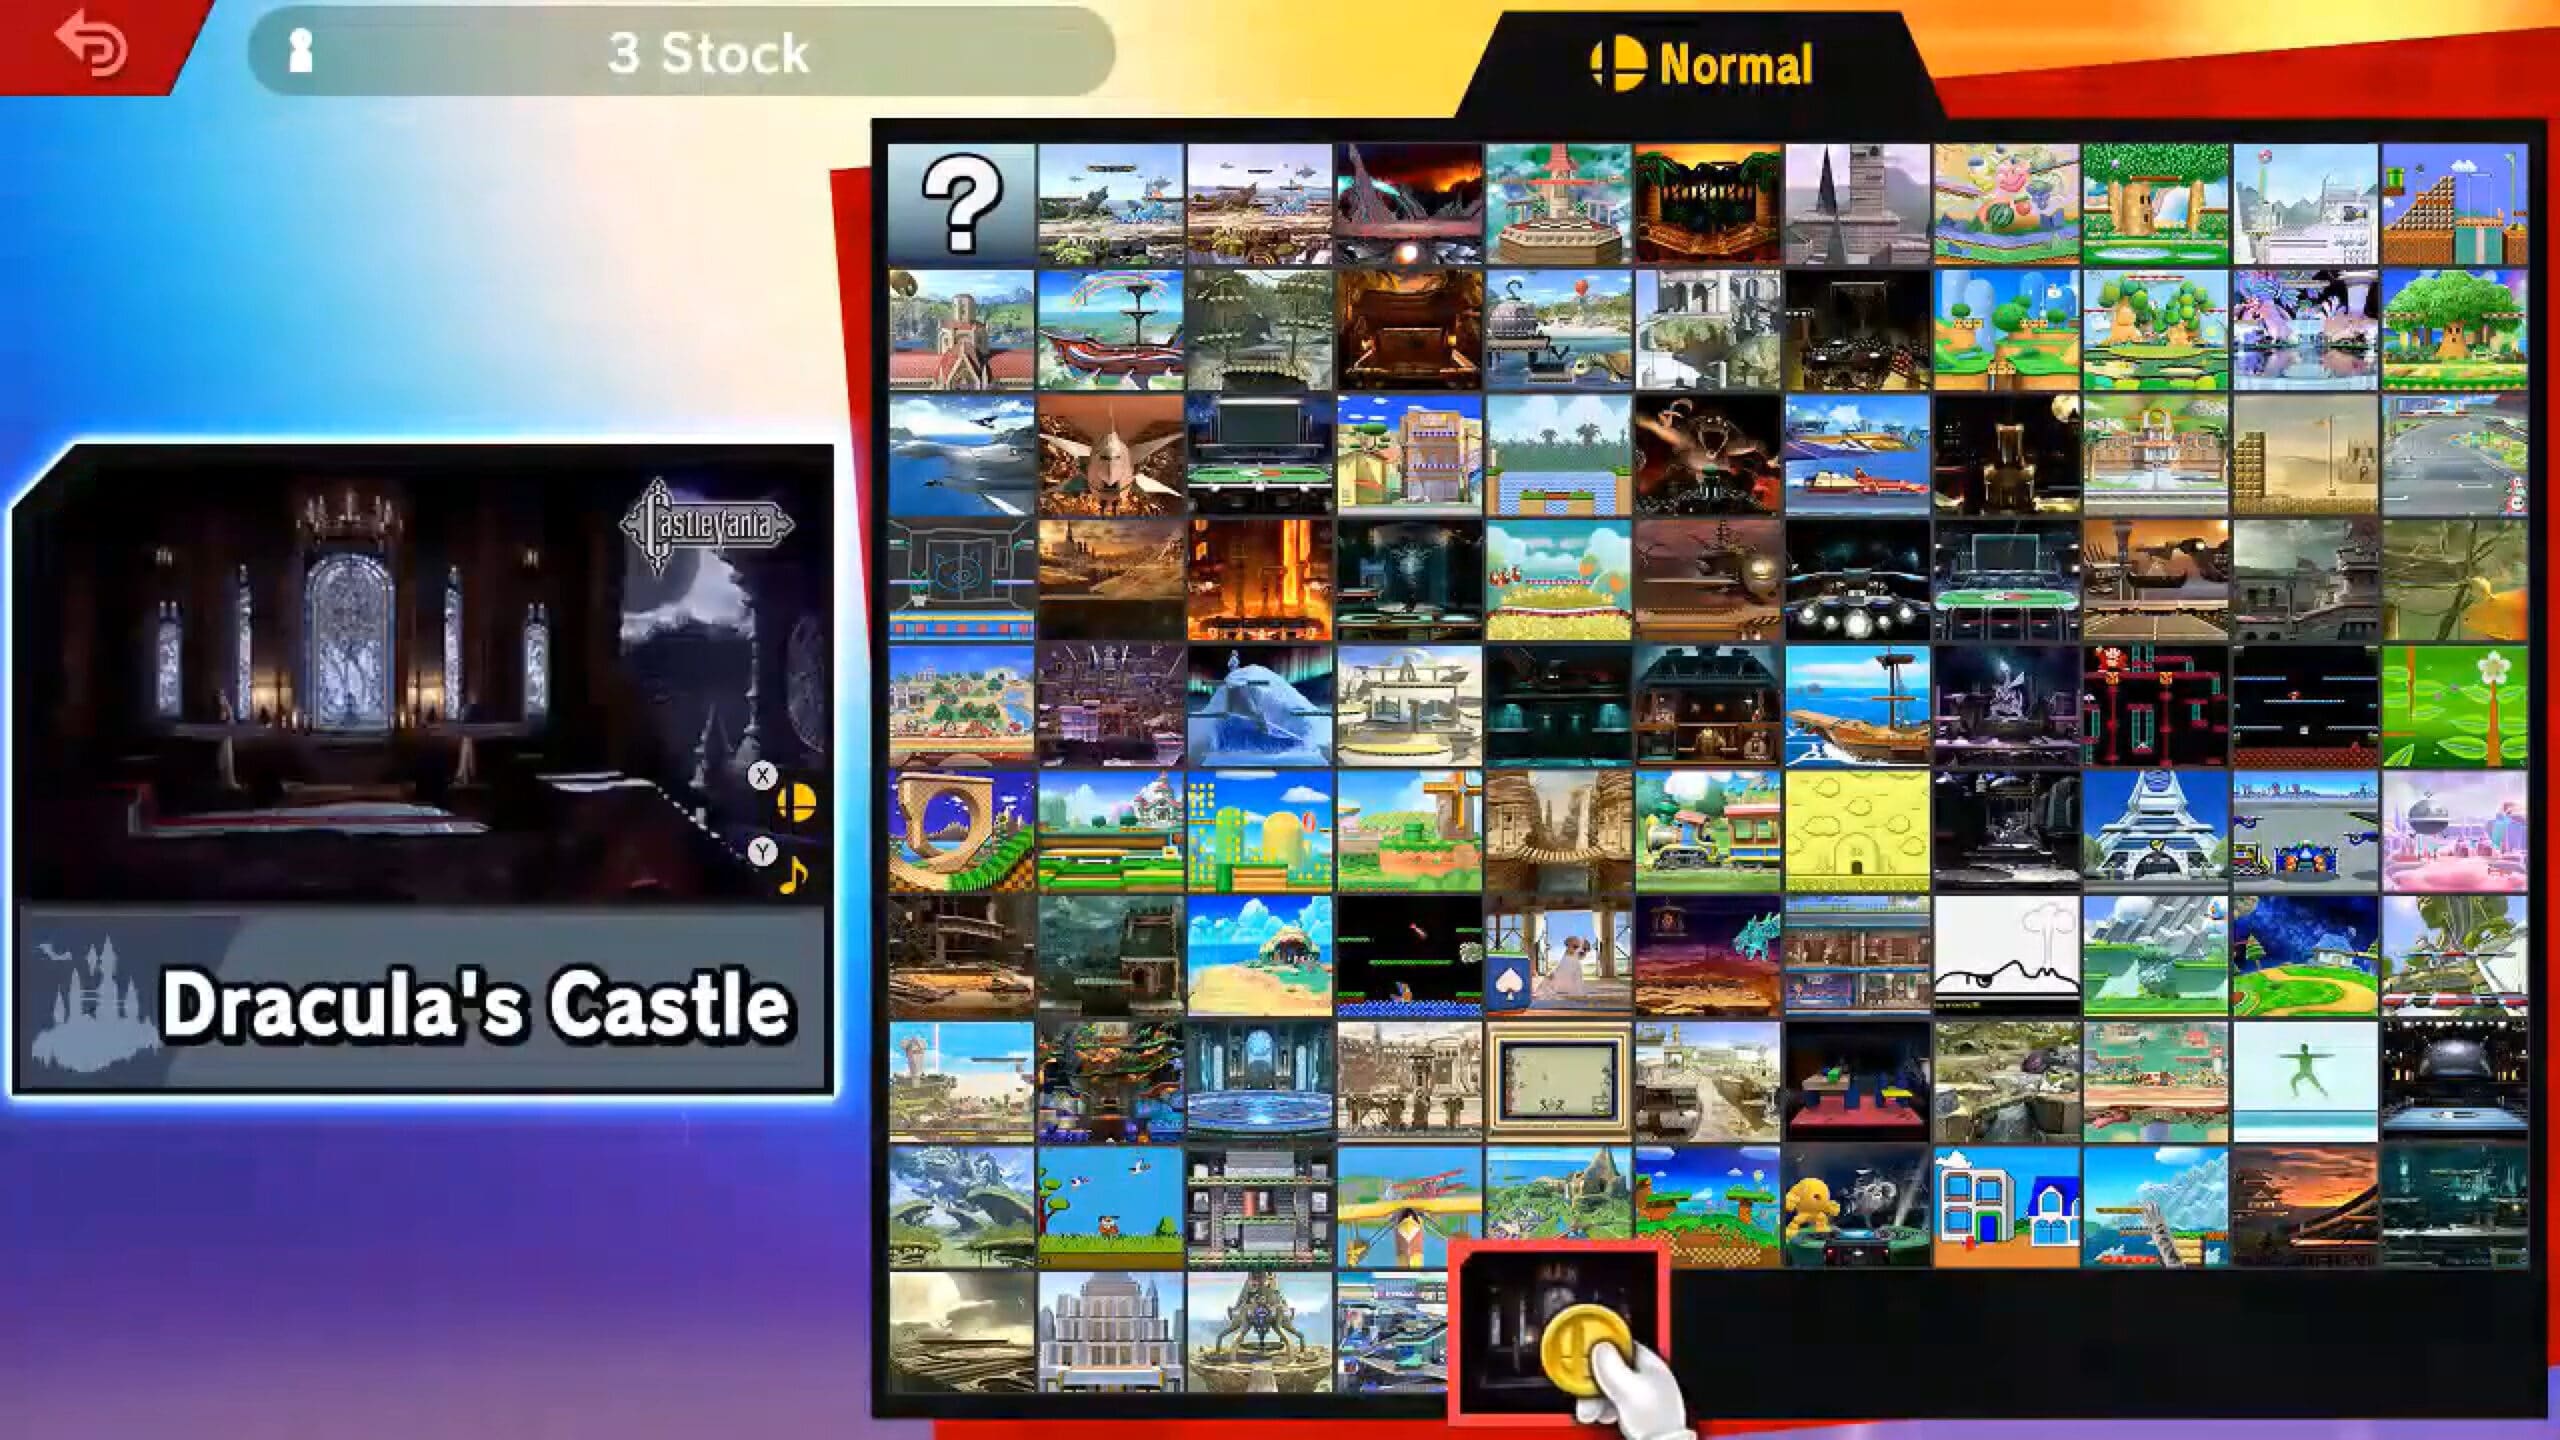 How To Unlock All Super Smash Bros Ultimate Stages - 3840 x 2160 jpeg 3252kB